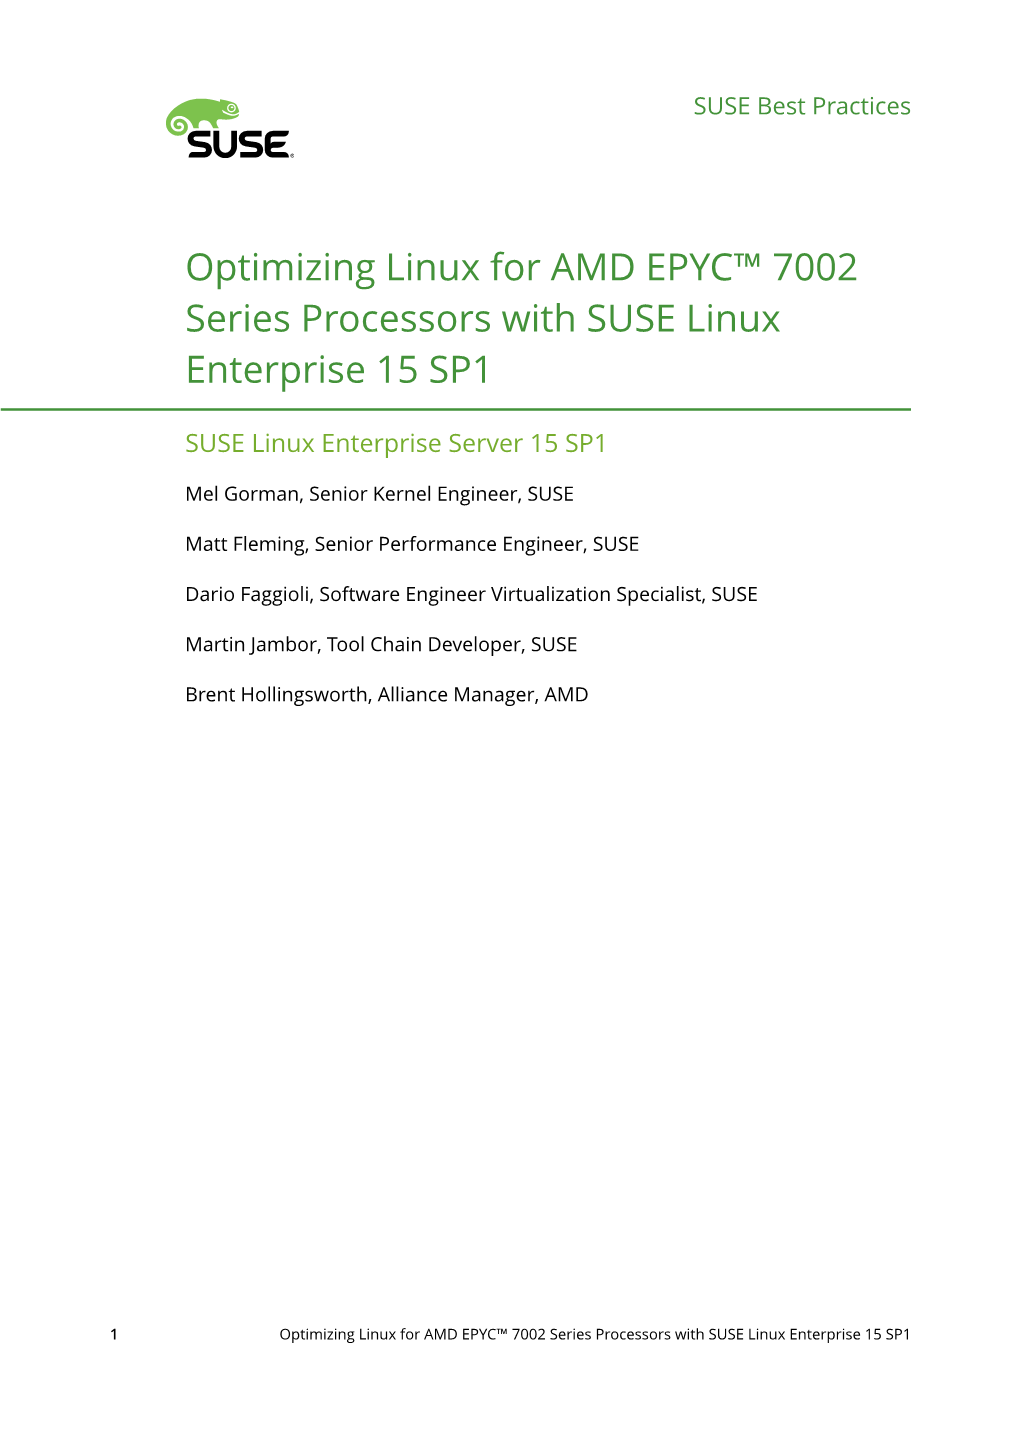 Optimizing Linux for AMD EPYC™ 7002 Series Processors with SUSE Linux Enterprise 15 SP1